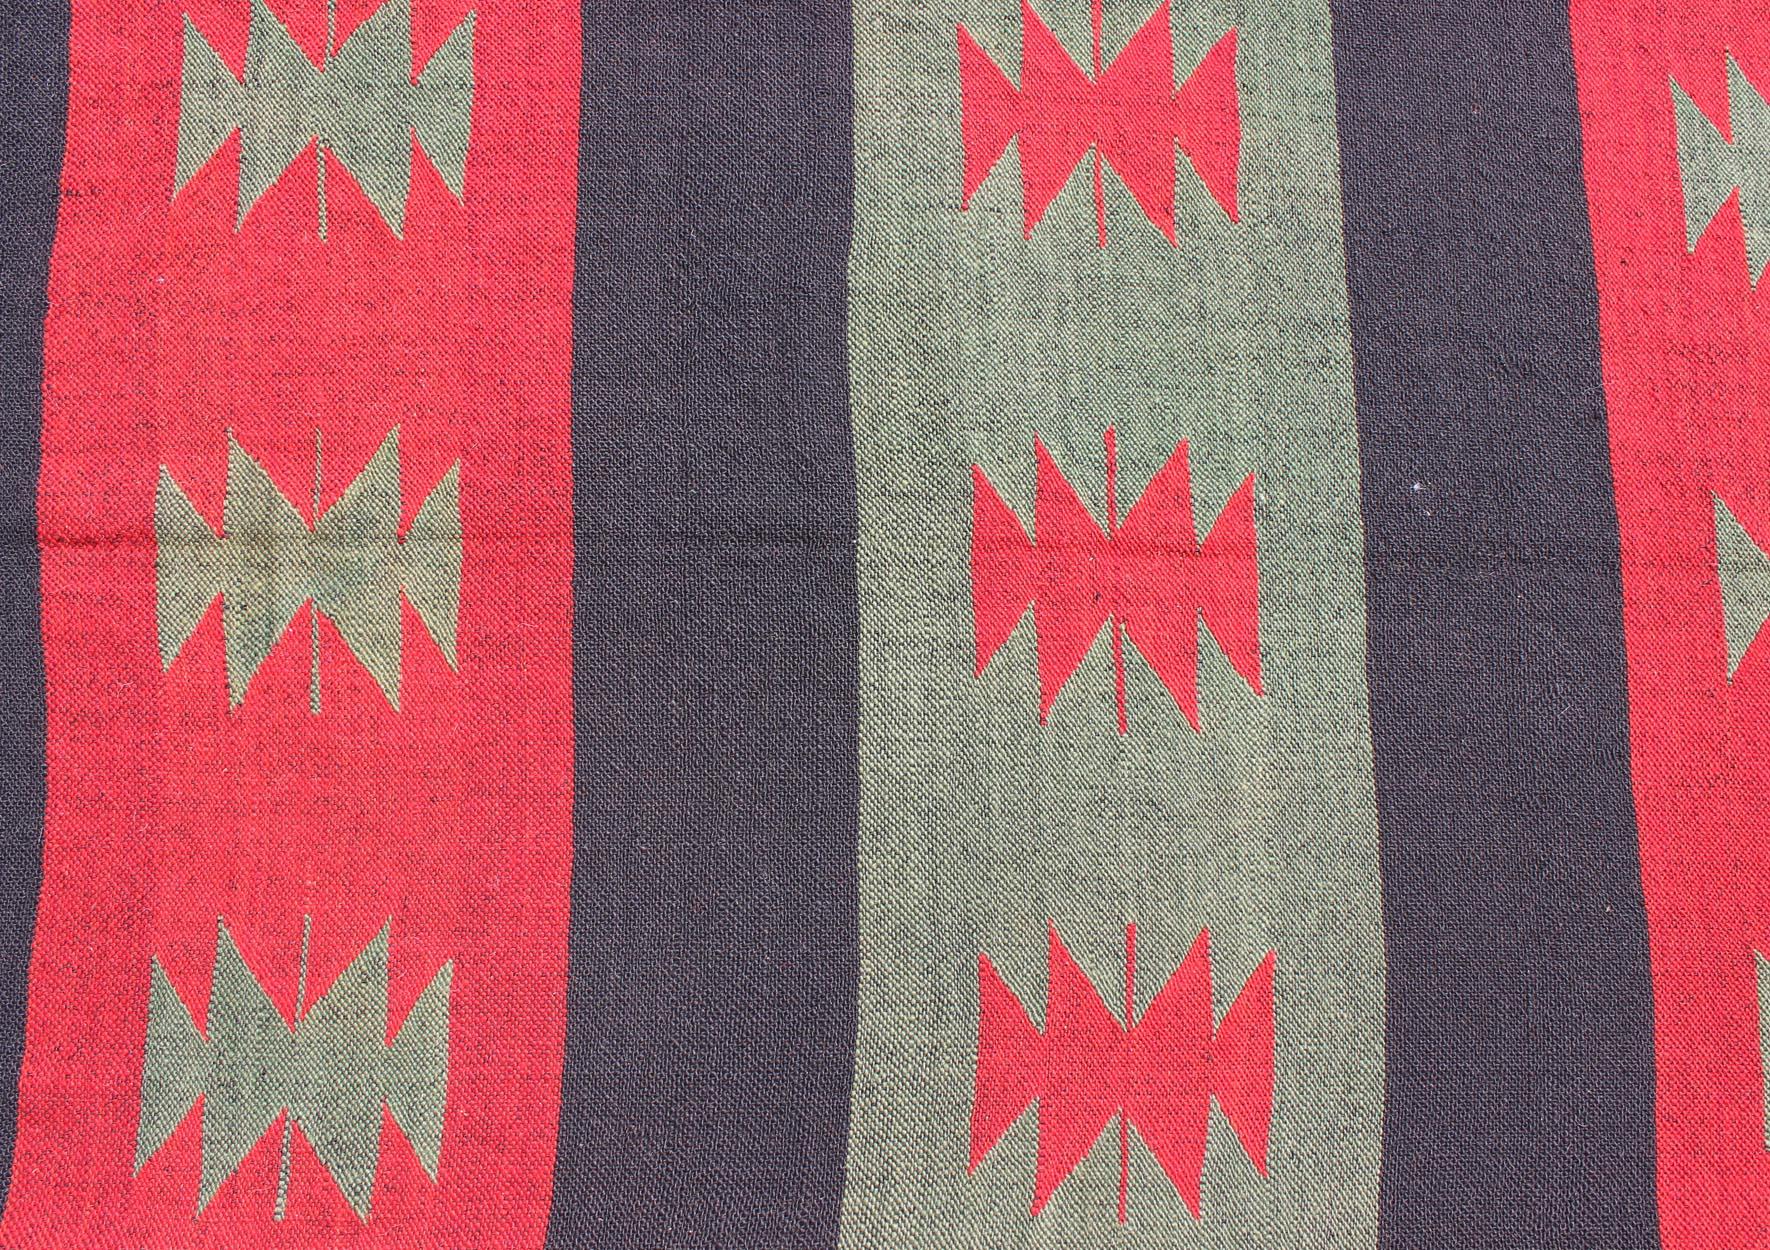 Large Vintage Kilim Rug with Tribal Shapes and Stripes in Red, Brown and Green In Excellent Condition For Sale In Atlanta, GA